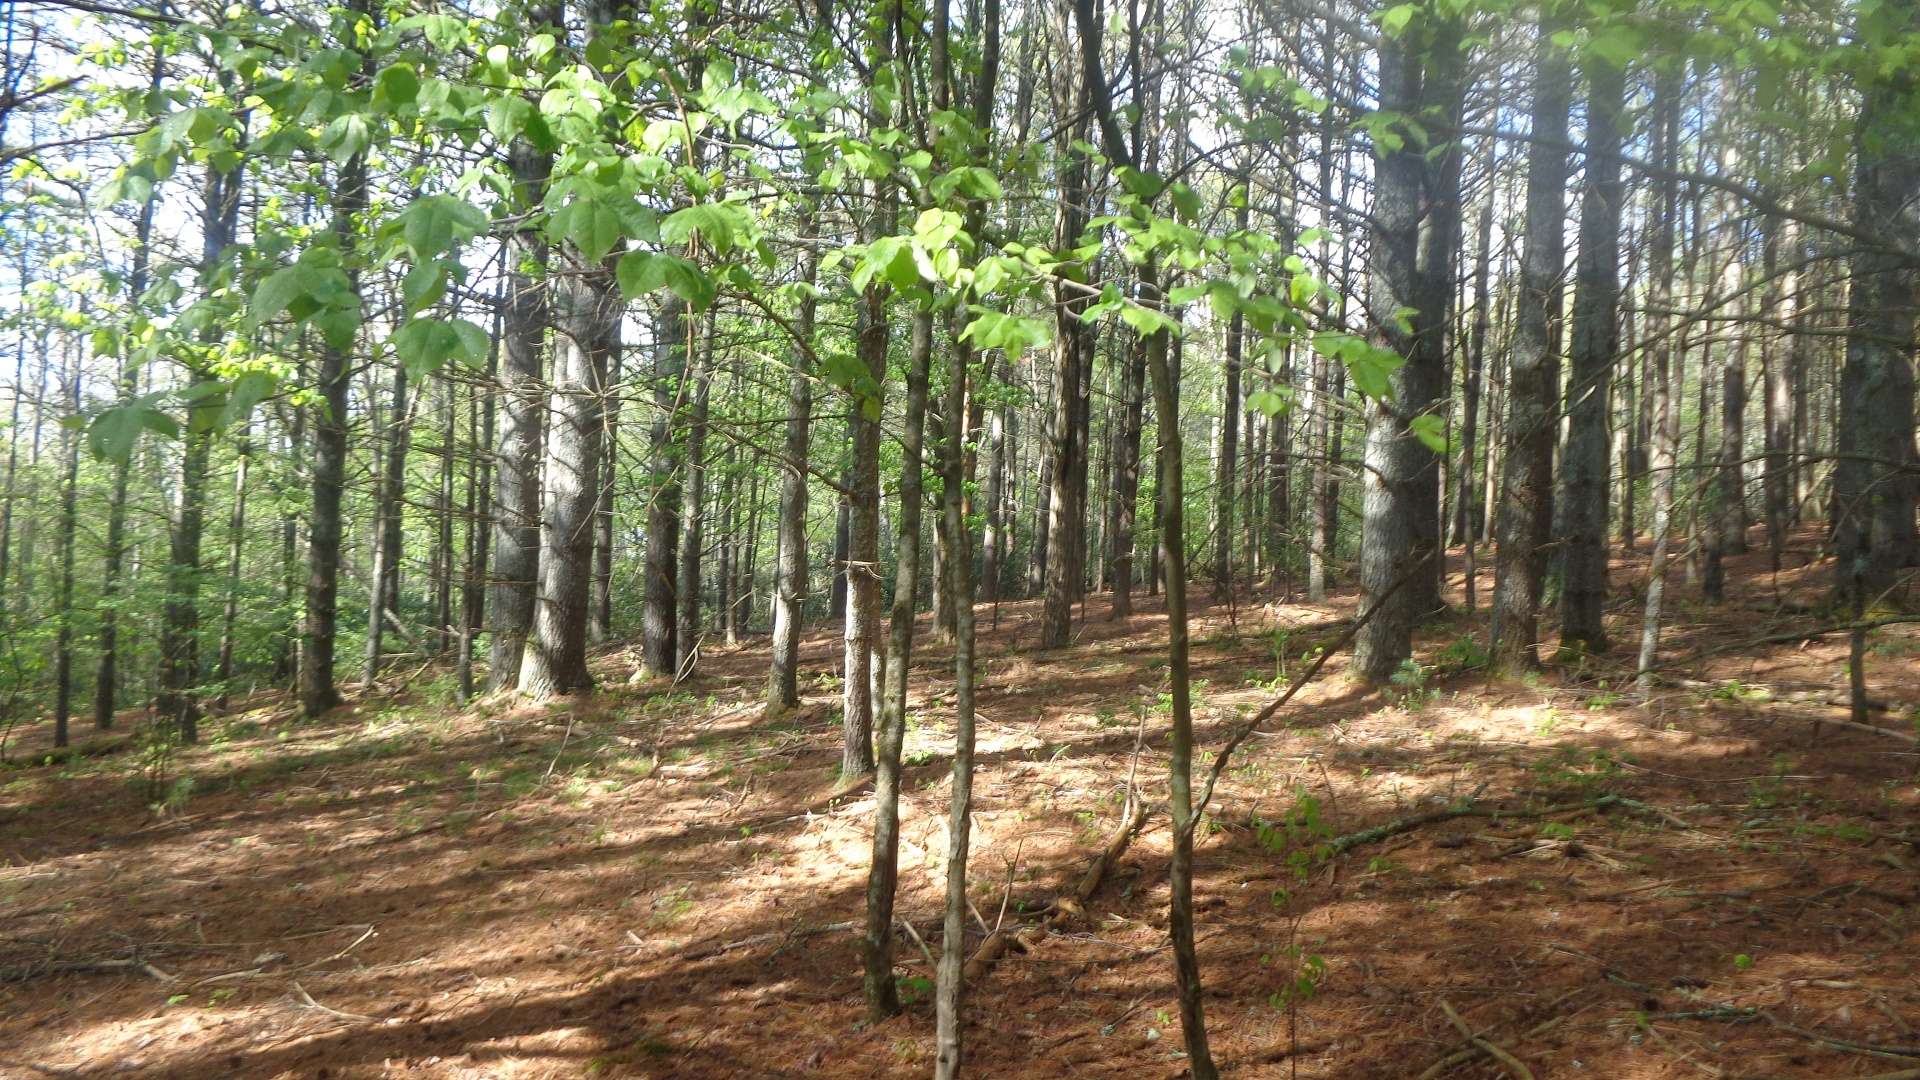 The bulk of the tract is beautifully wooded with a diverse mixture of both hardwoods and evergreens.